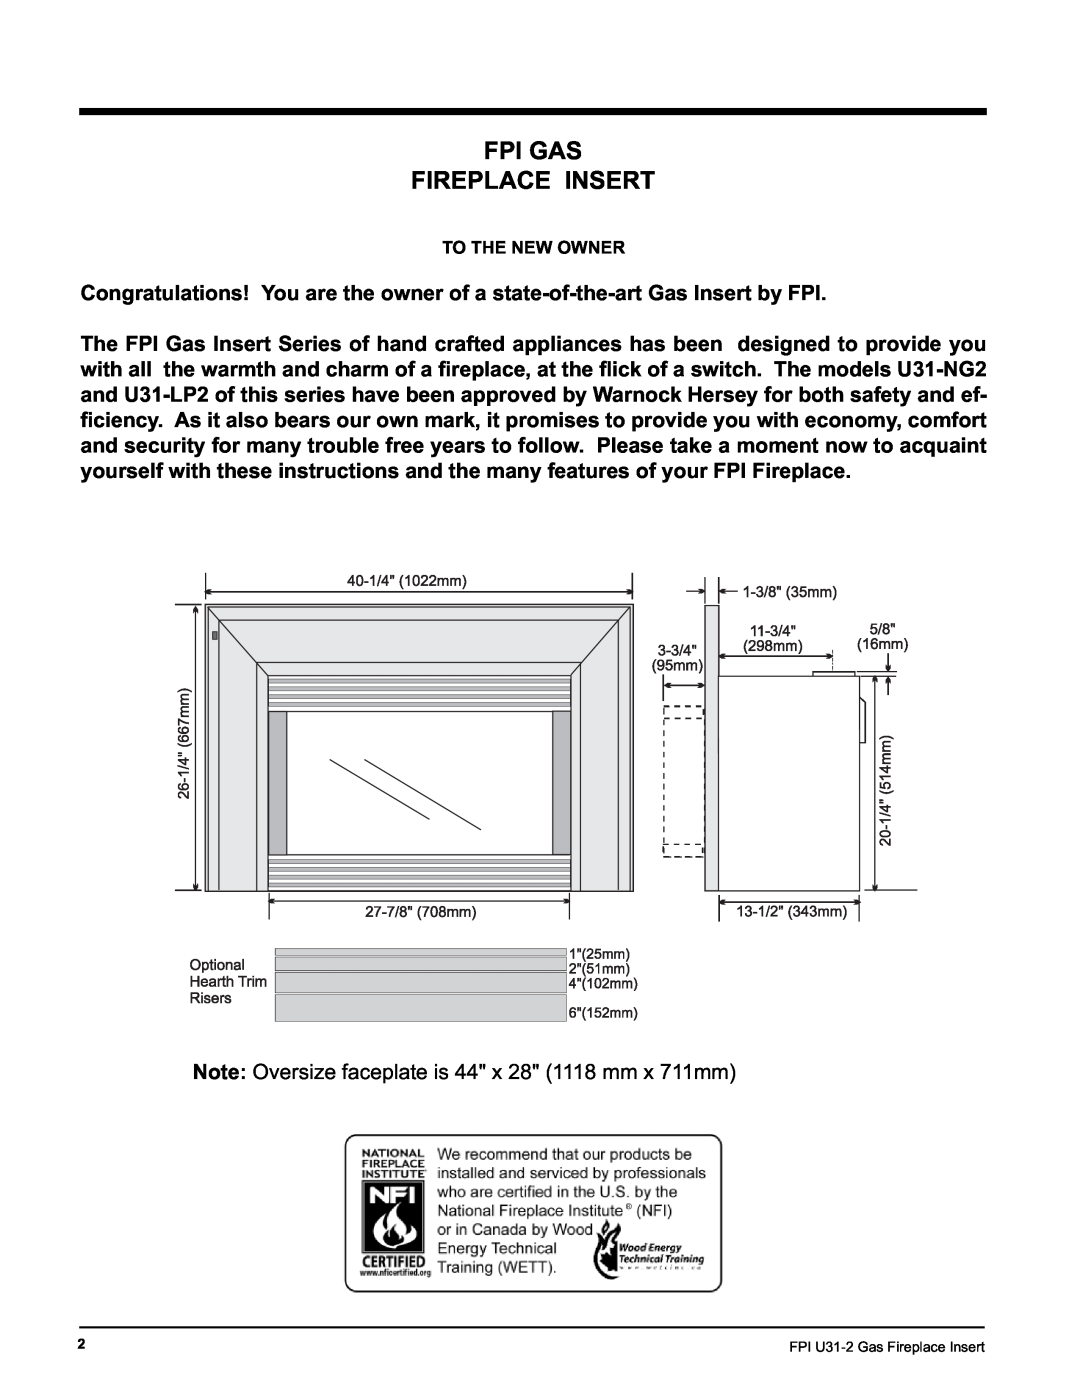 Recoton/Advent U31-NG2, U31-LP2 installation manual Fpi Gas Fireplace Insert, To The New Owner 